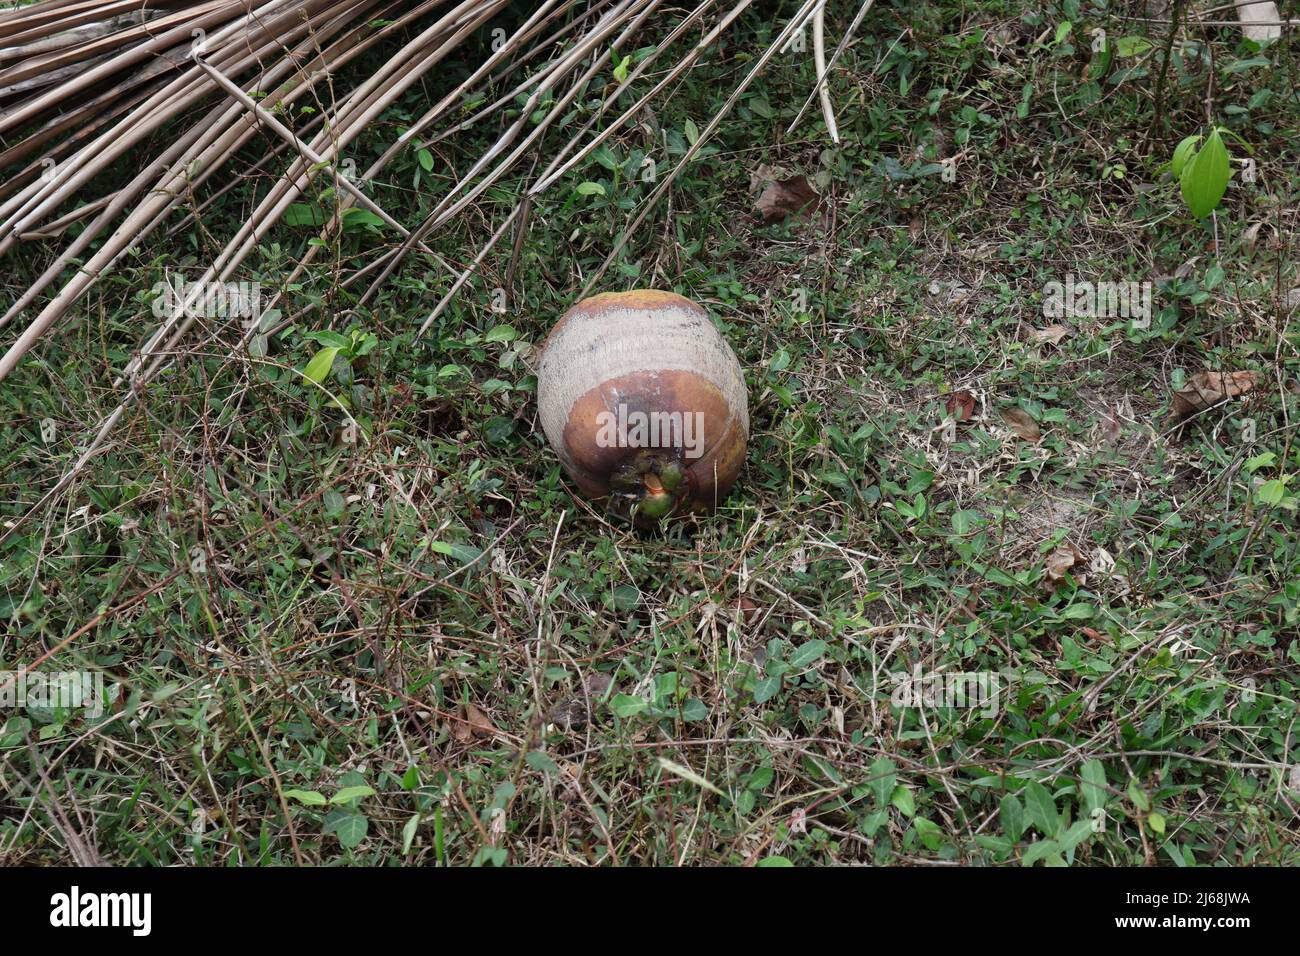 Side view of a fallen mature coconut fruit on the grassy ground at coconut plantation Stock Photo